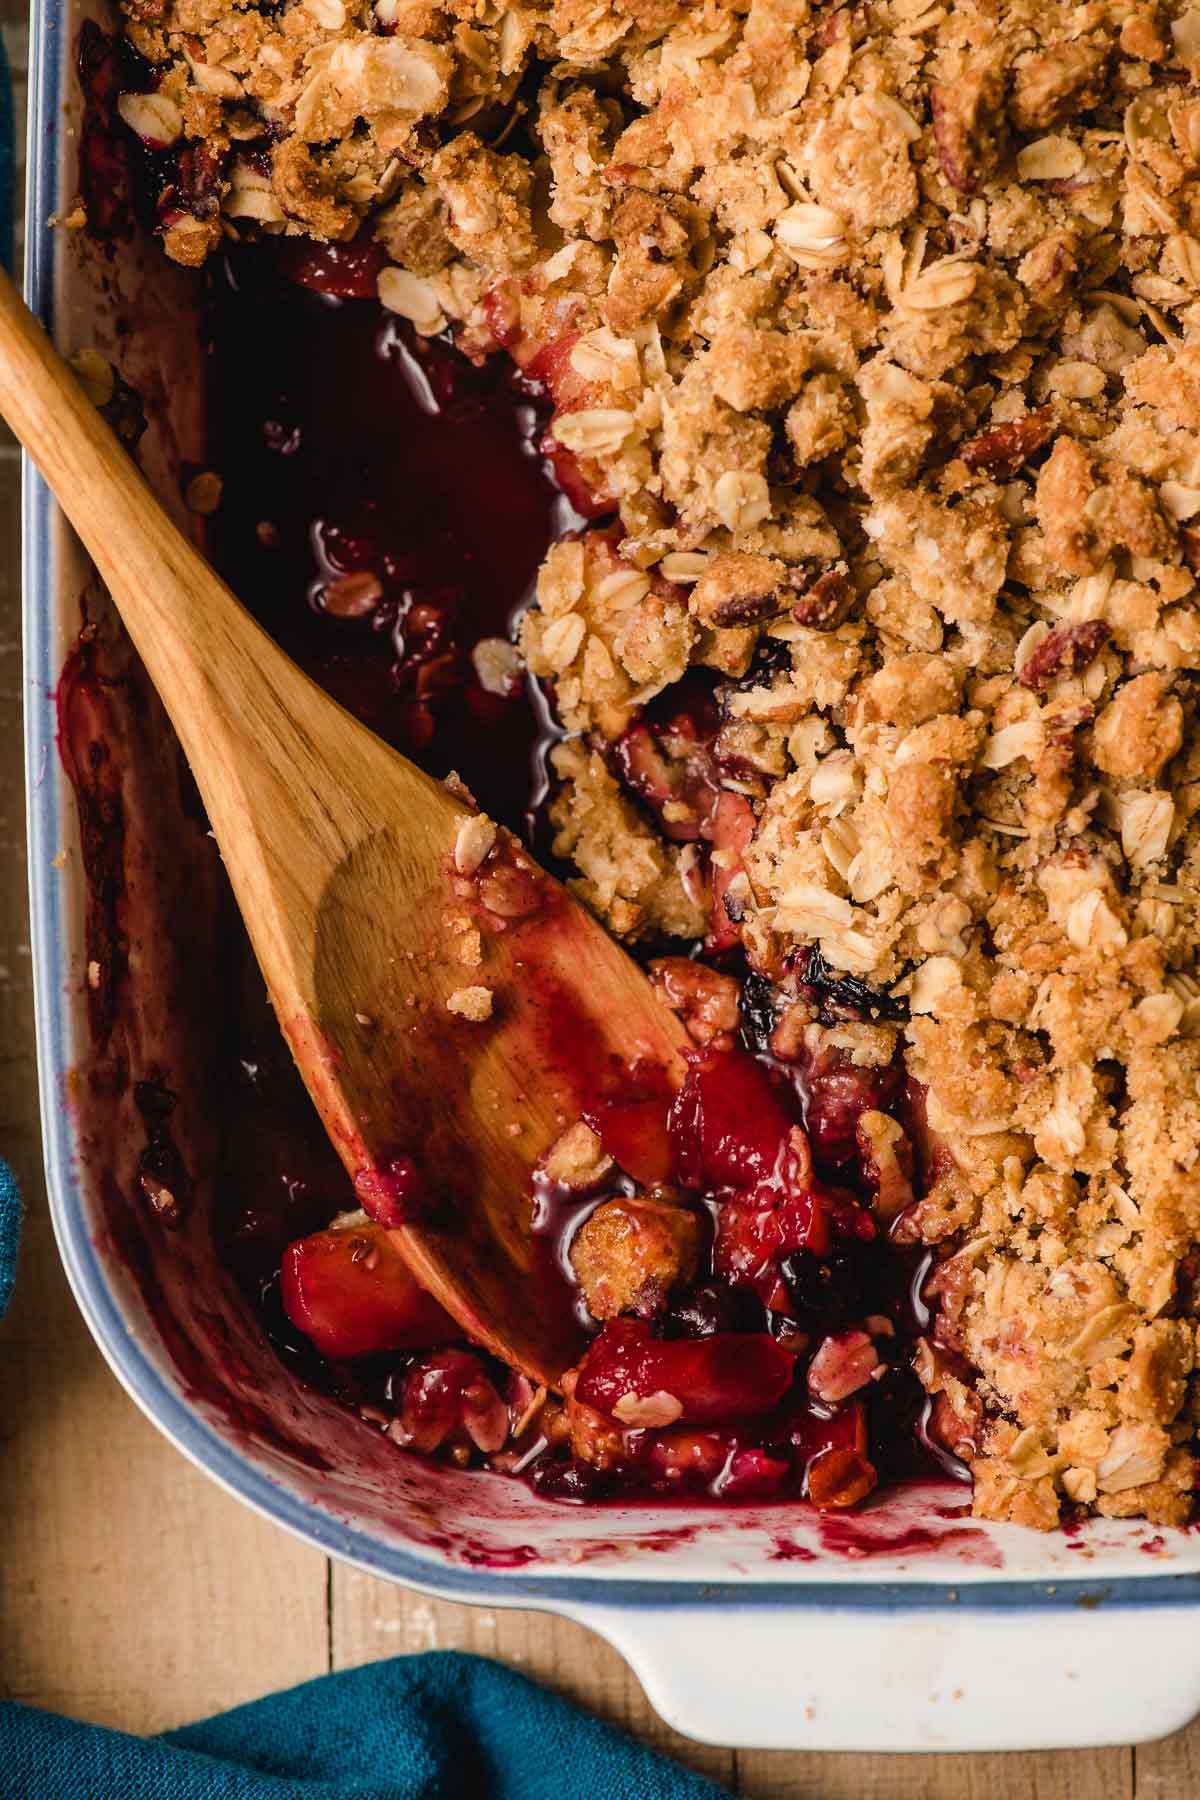 Rich, purple hued blueberry and apple crumble shown in a baking dish with a wooden spoon.